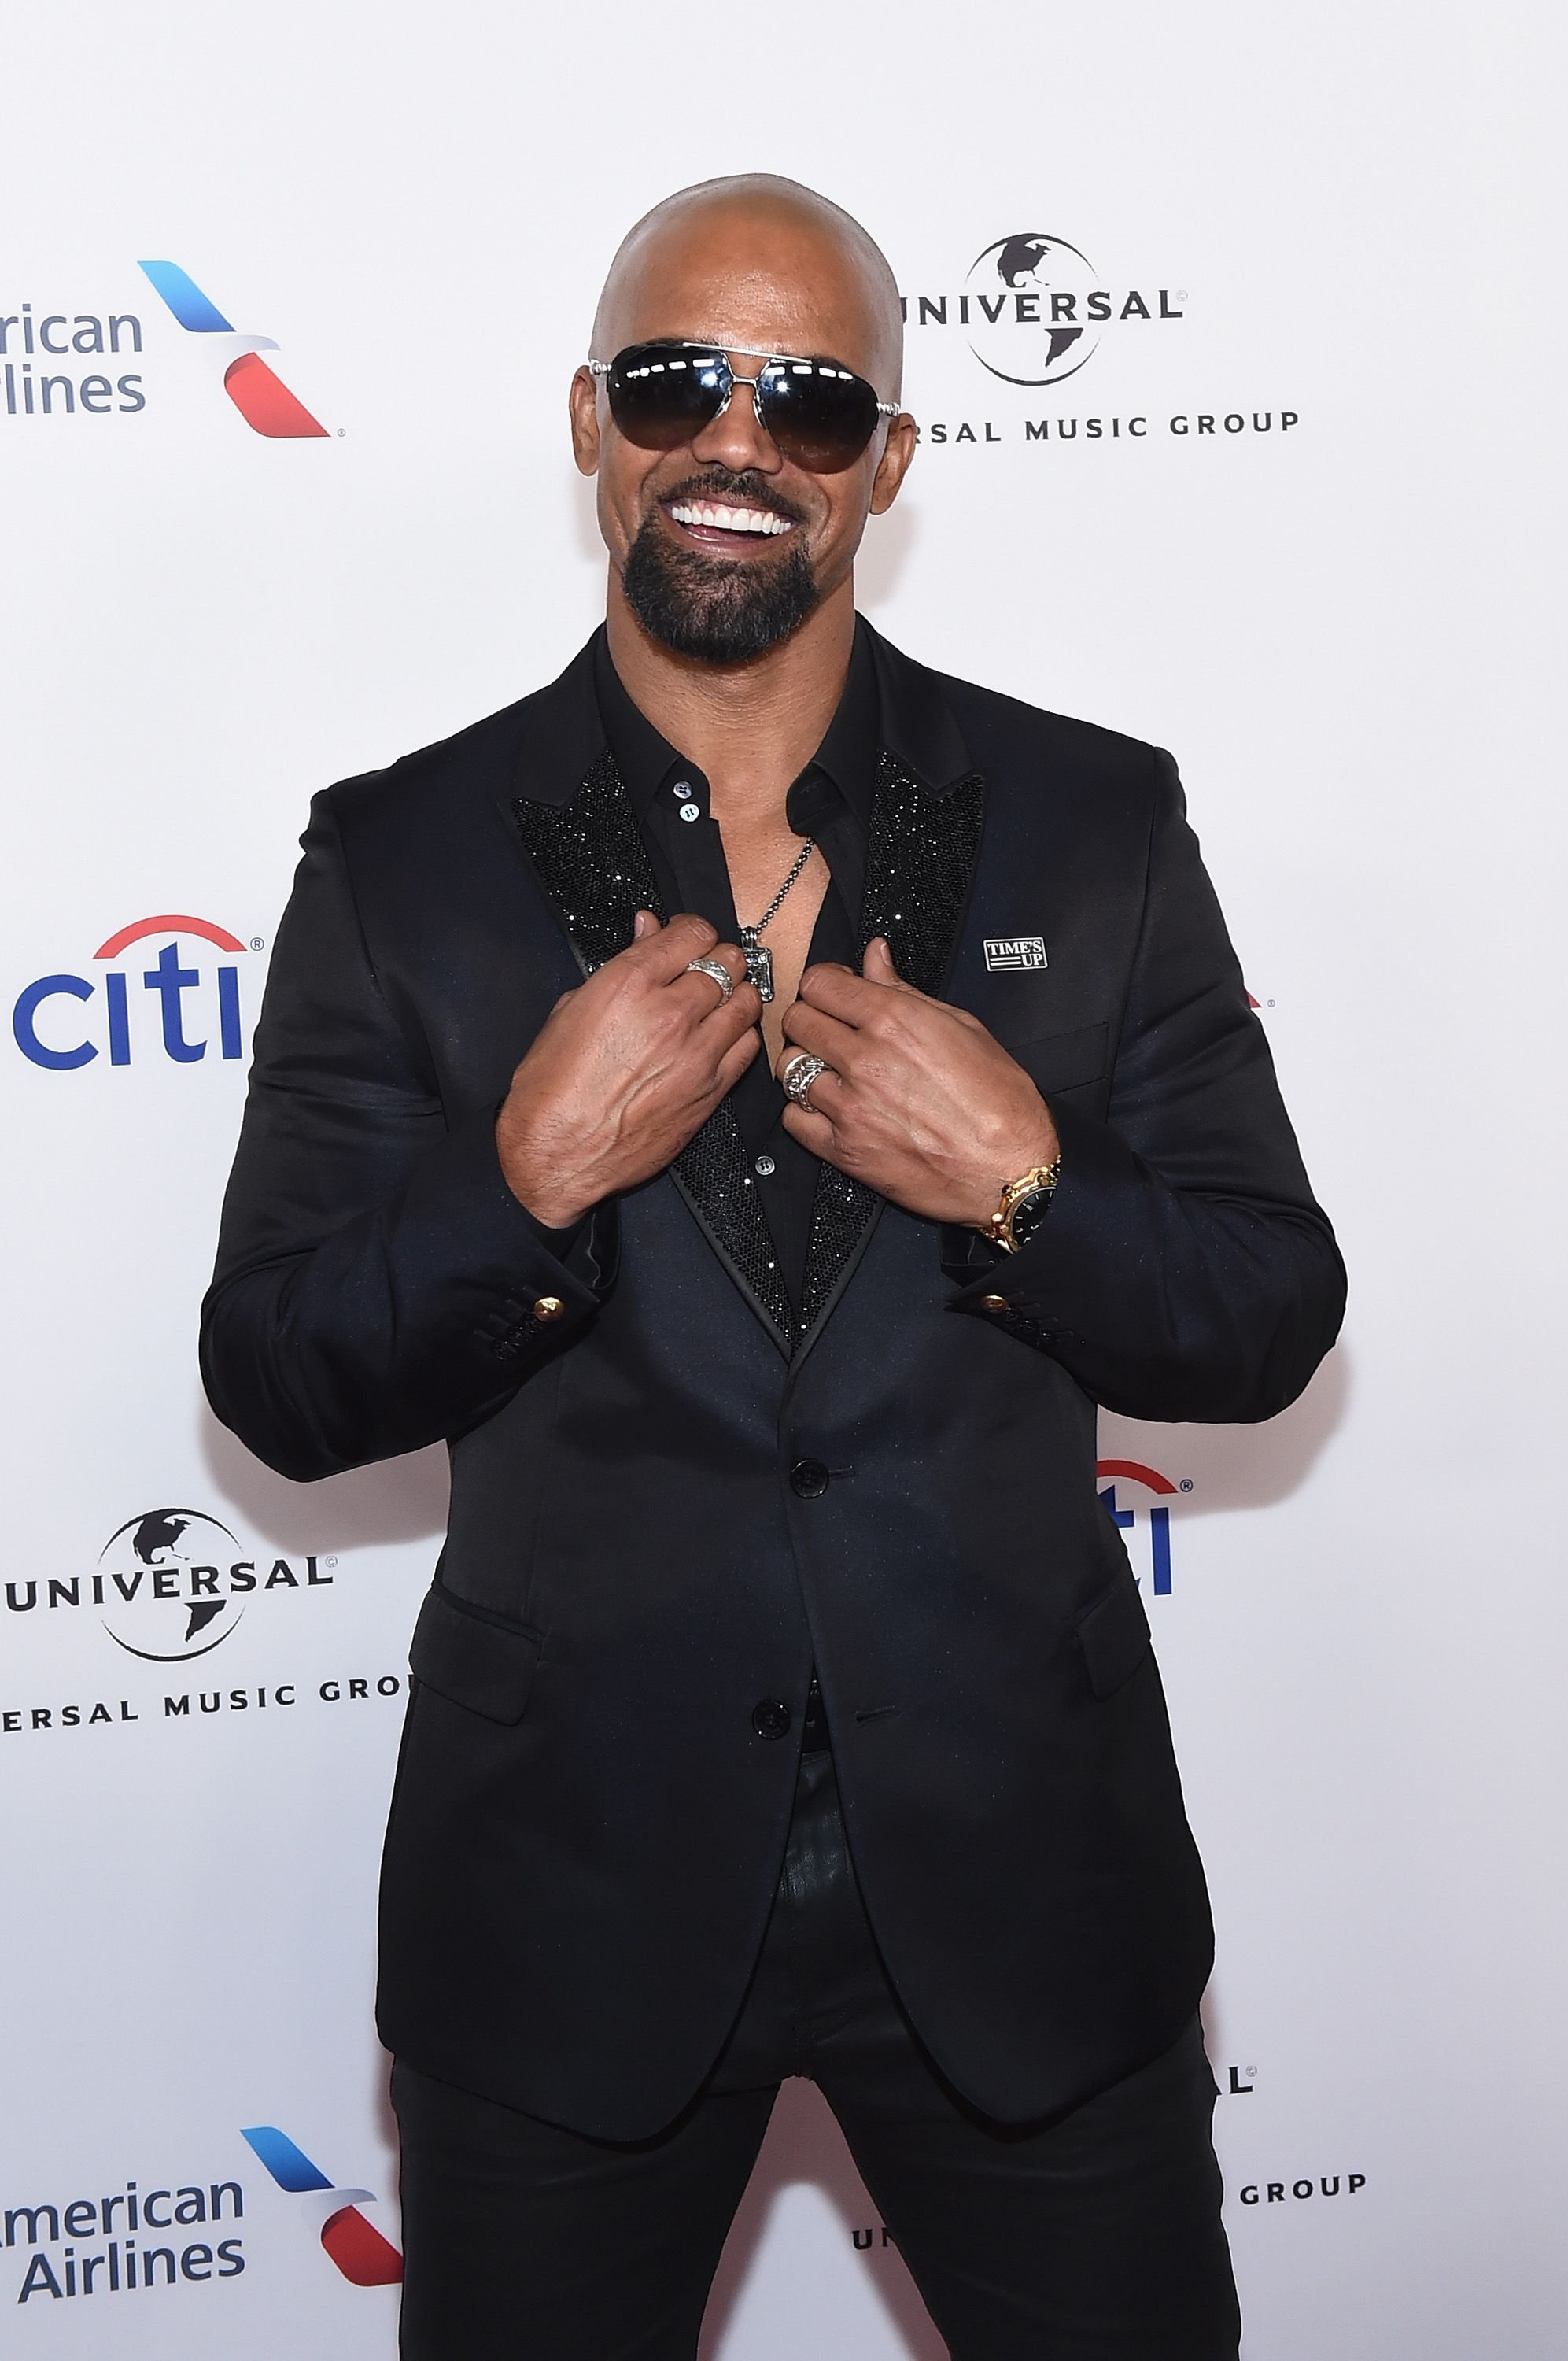 Shemar Moore at the Universal Music Group After Party in New York City on January 28, 2018. |  Photo: Getty Images